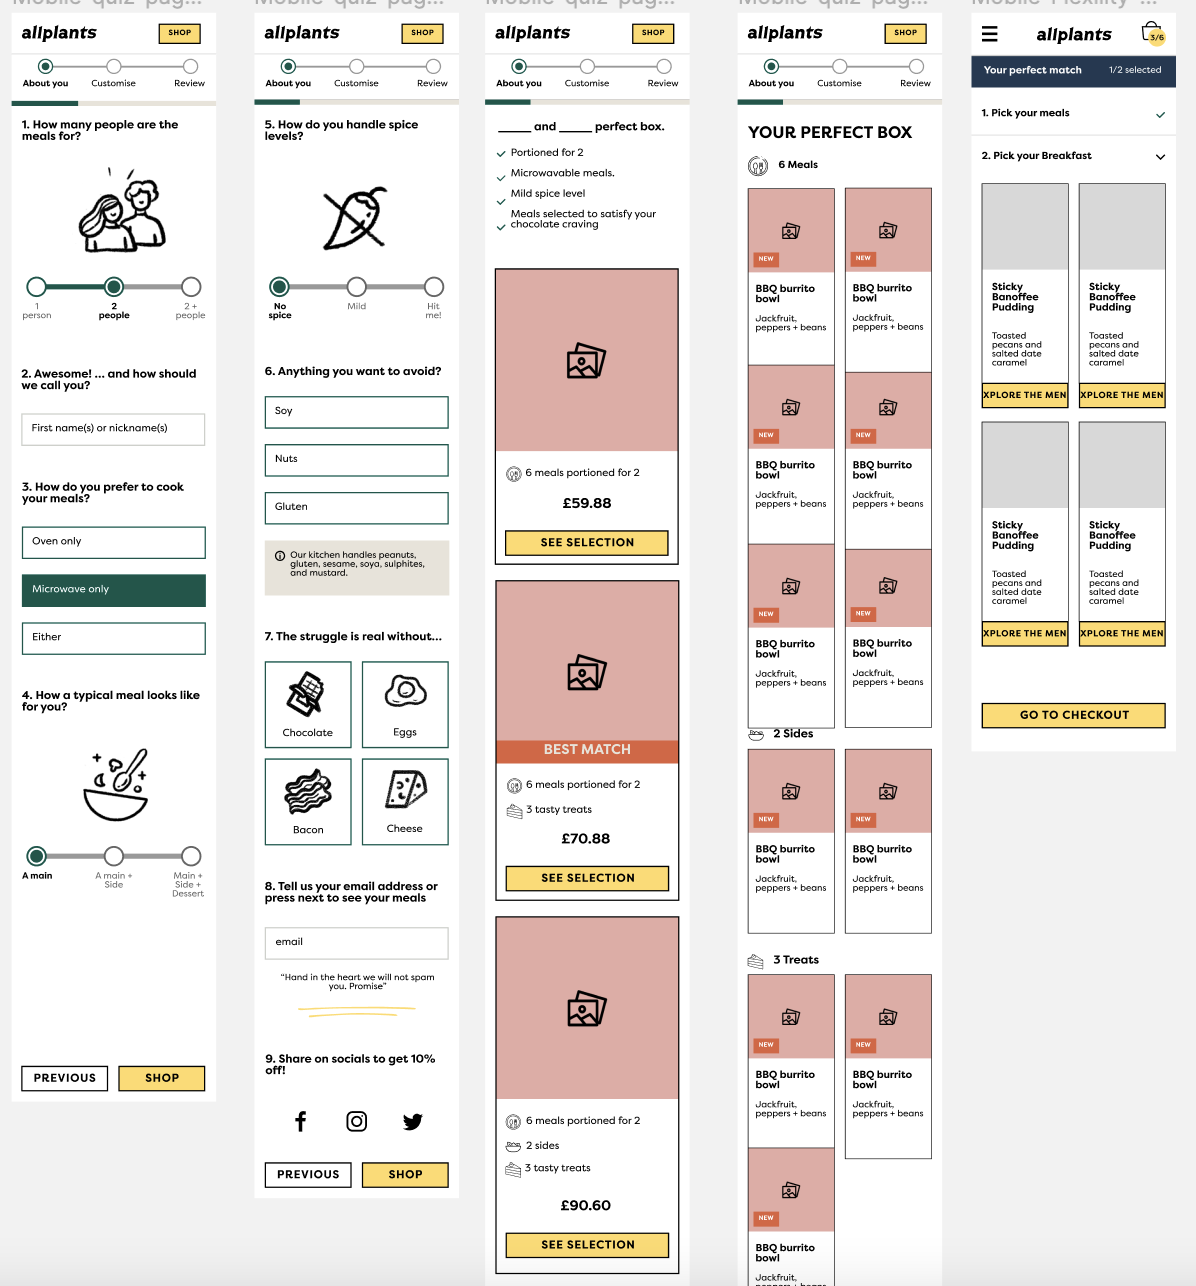 Wireframes of the first iteration of the different screens necessary for the website version of the wizard